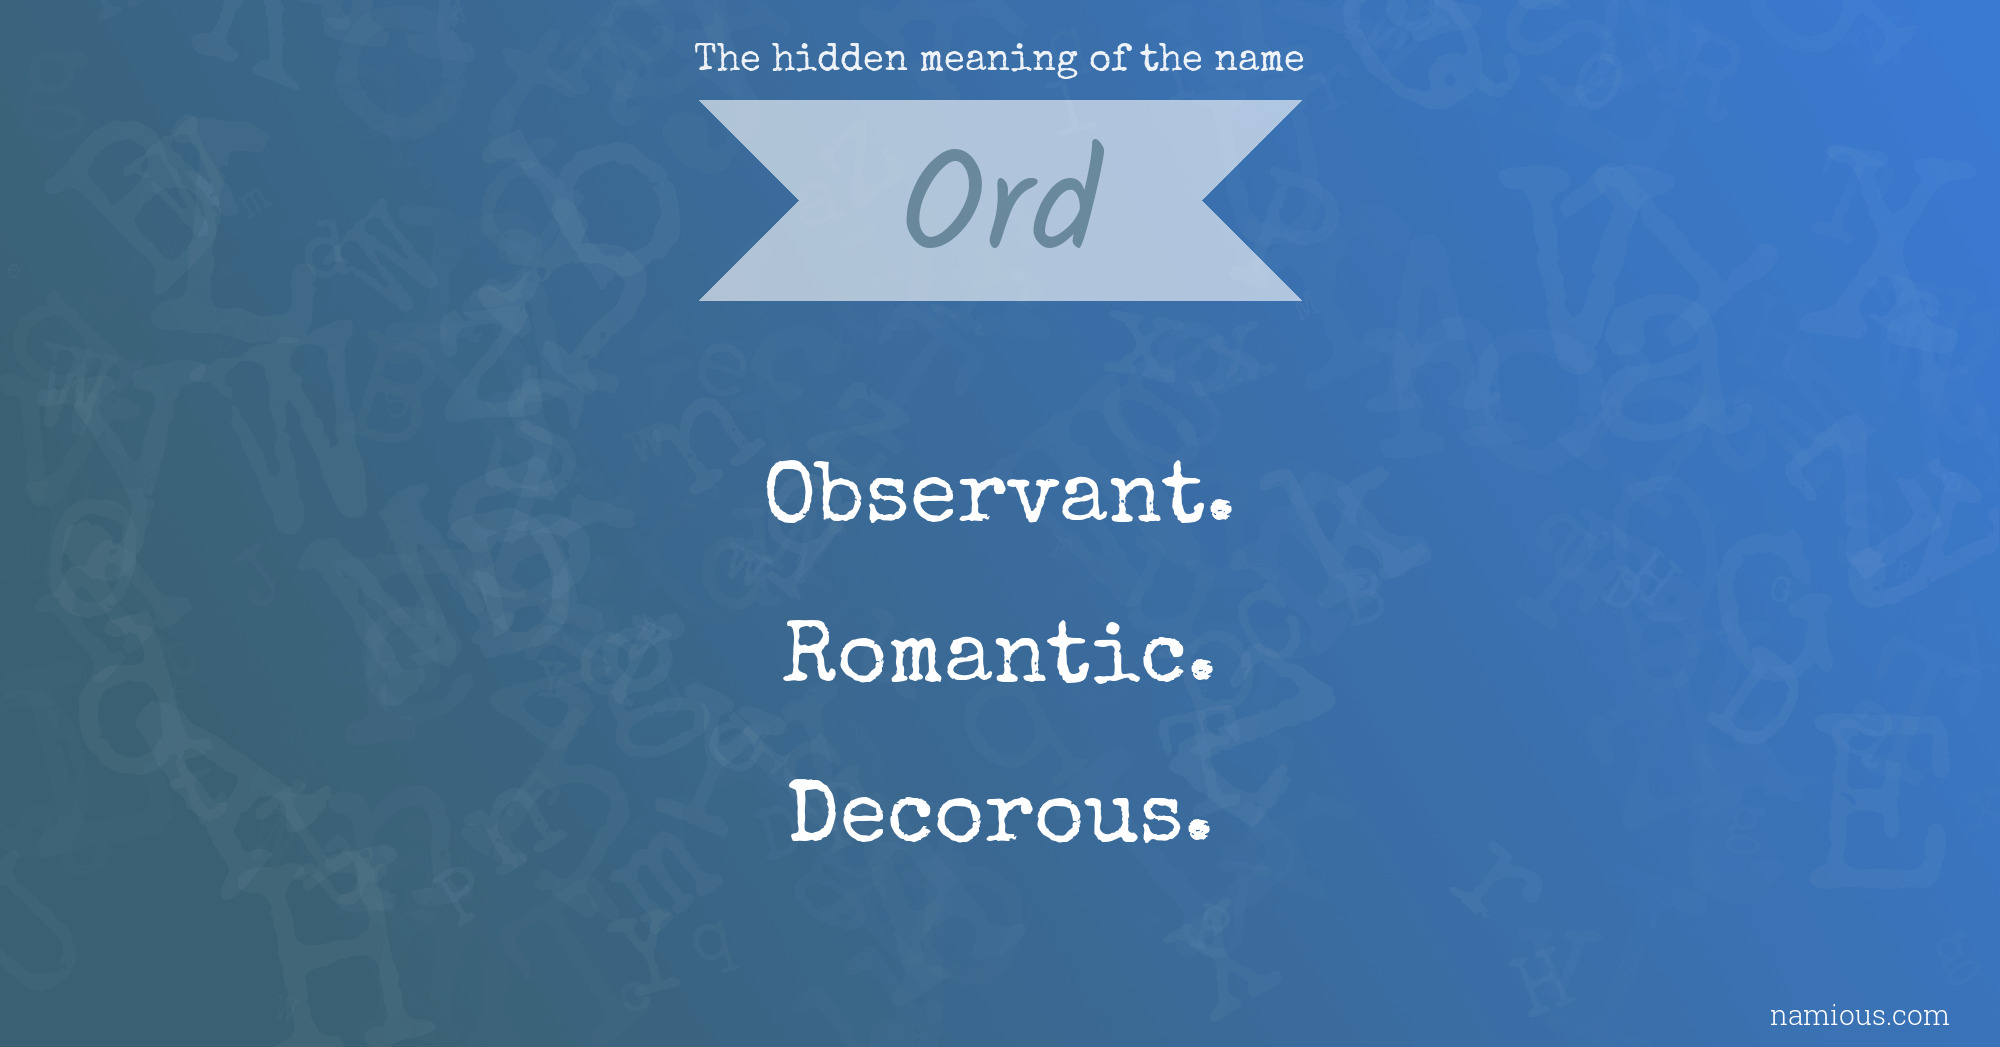 The hidden meaning of the name Ord